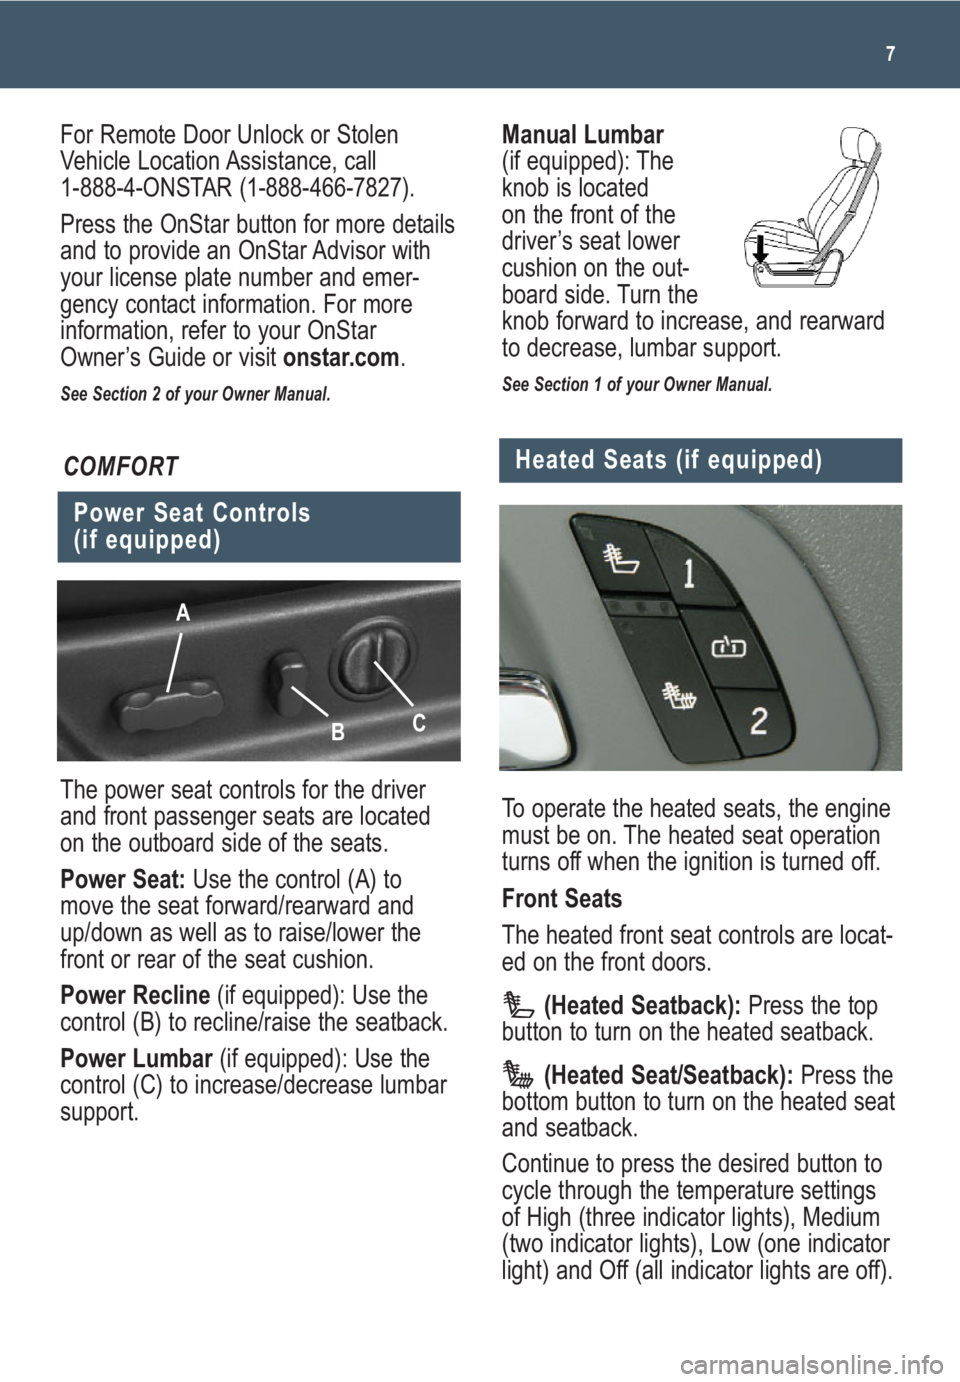 GMC YUKON 2009  Get To Know Guide Manual Lumbar 
(if equipped): The
knob is located
on the front of the
driver’s seat lower
cushion on the out-
board side. Turn the
knob forward to increase, and rearward
to decrease, lumbar support.